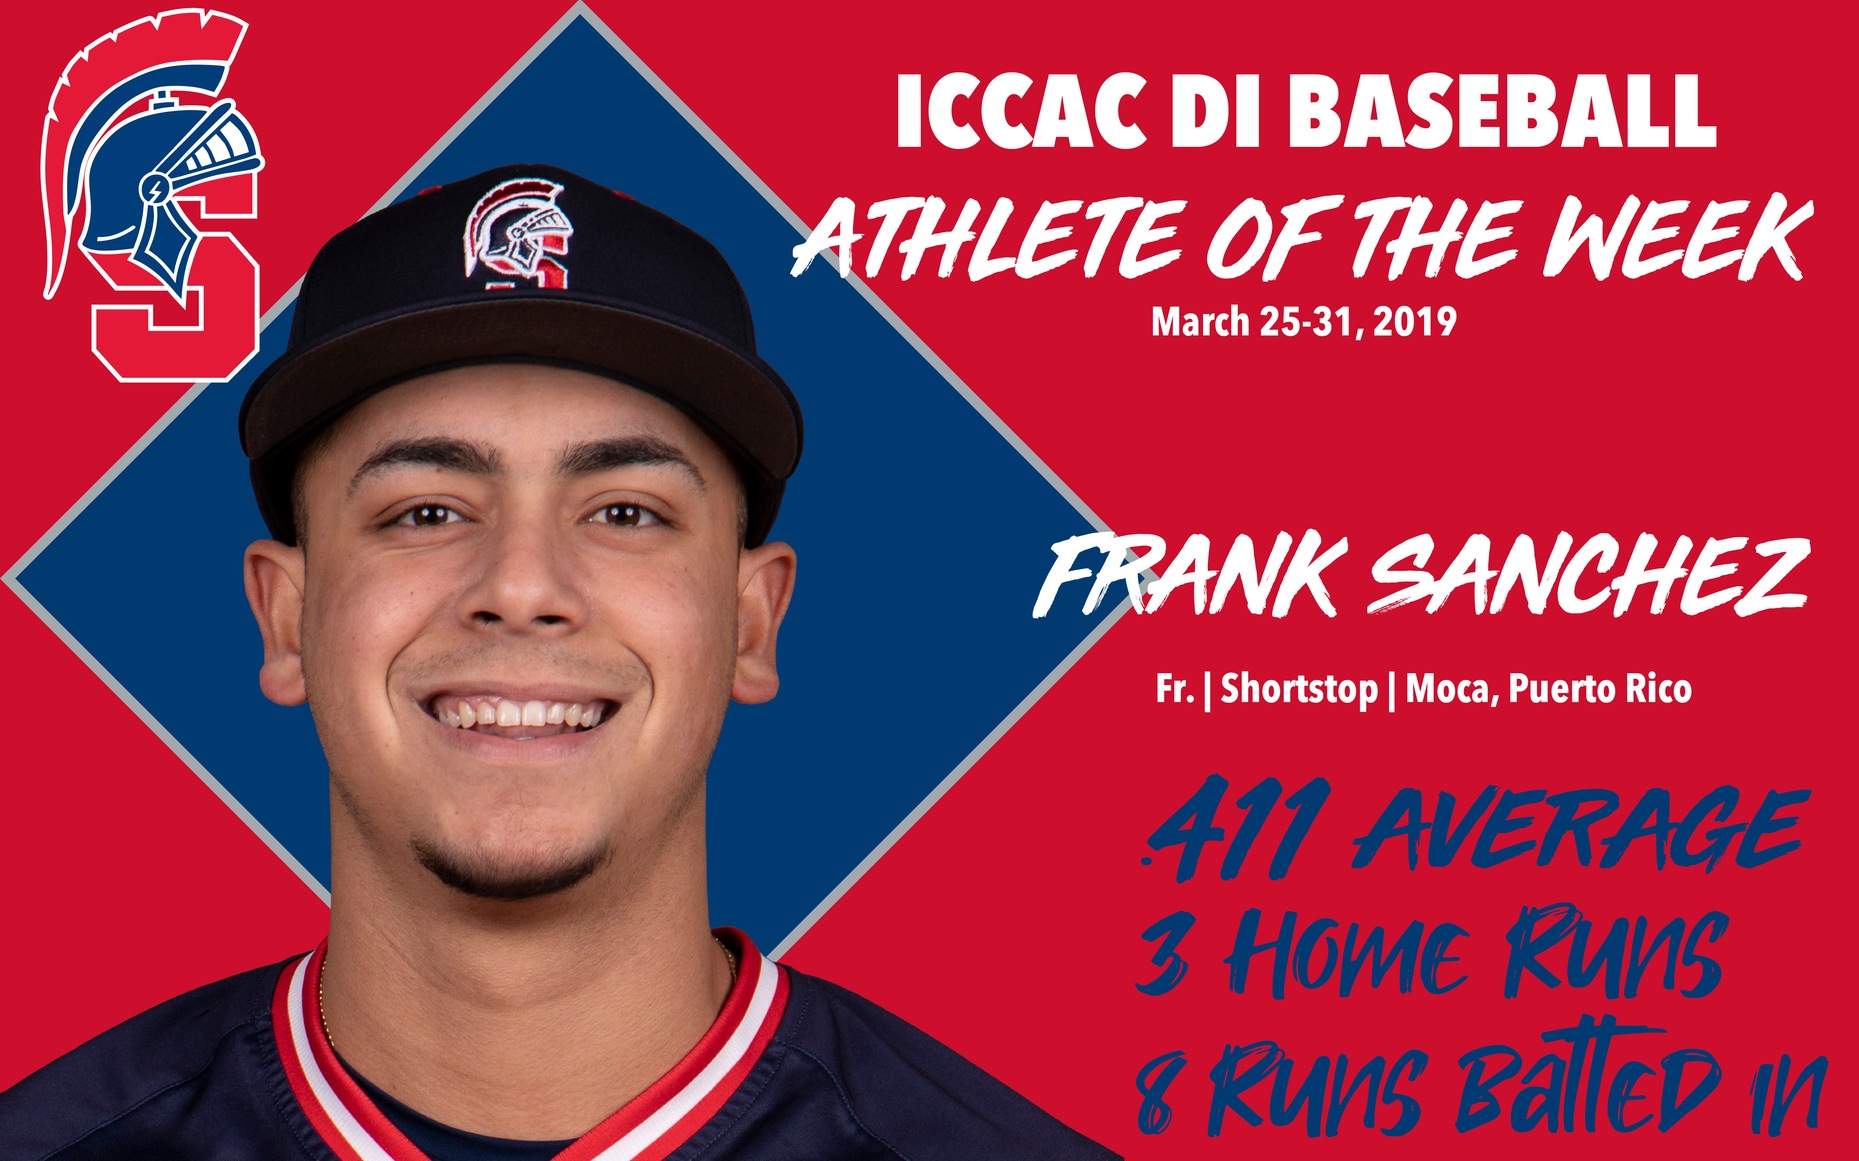 Southwestern freshman Frank Sanchez was named the ICCAC DI Baseball Athlete of the Week.